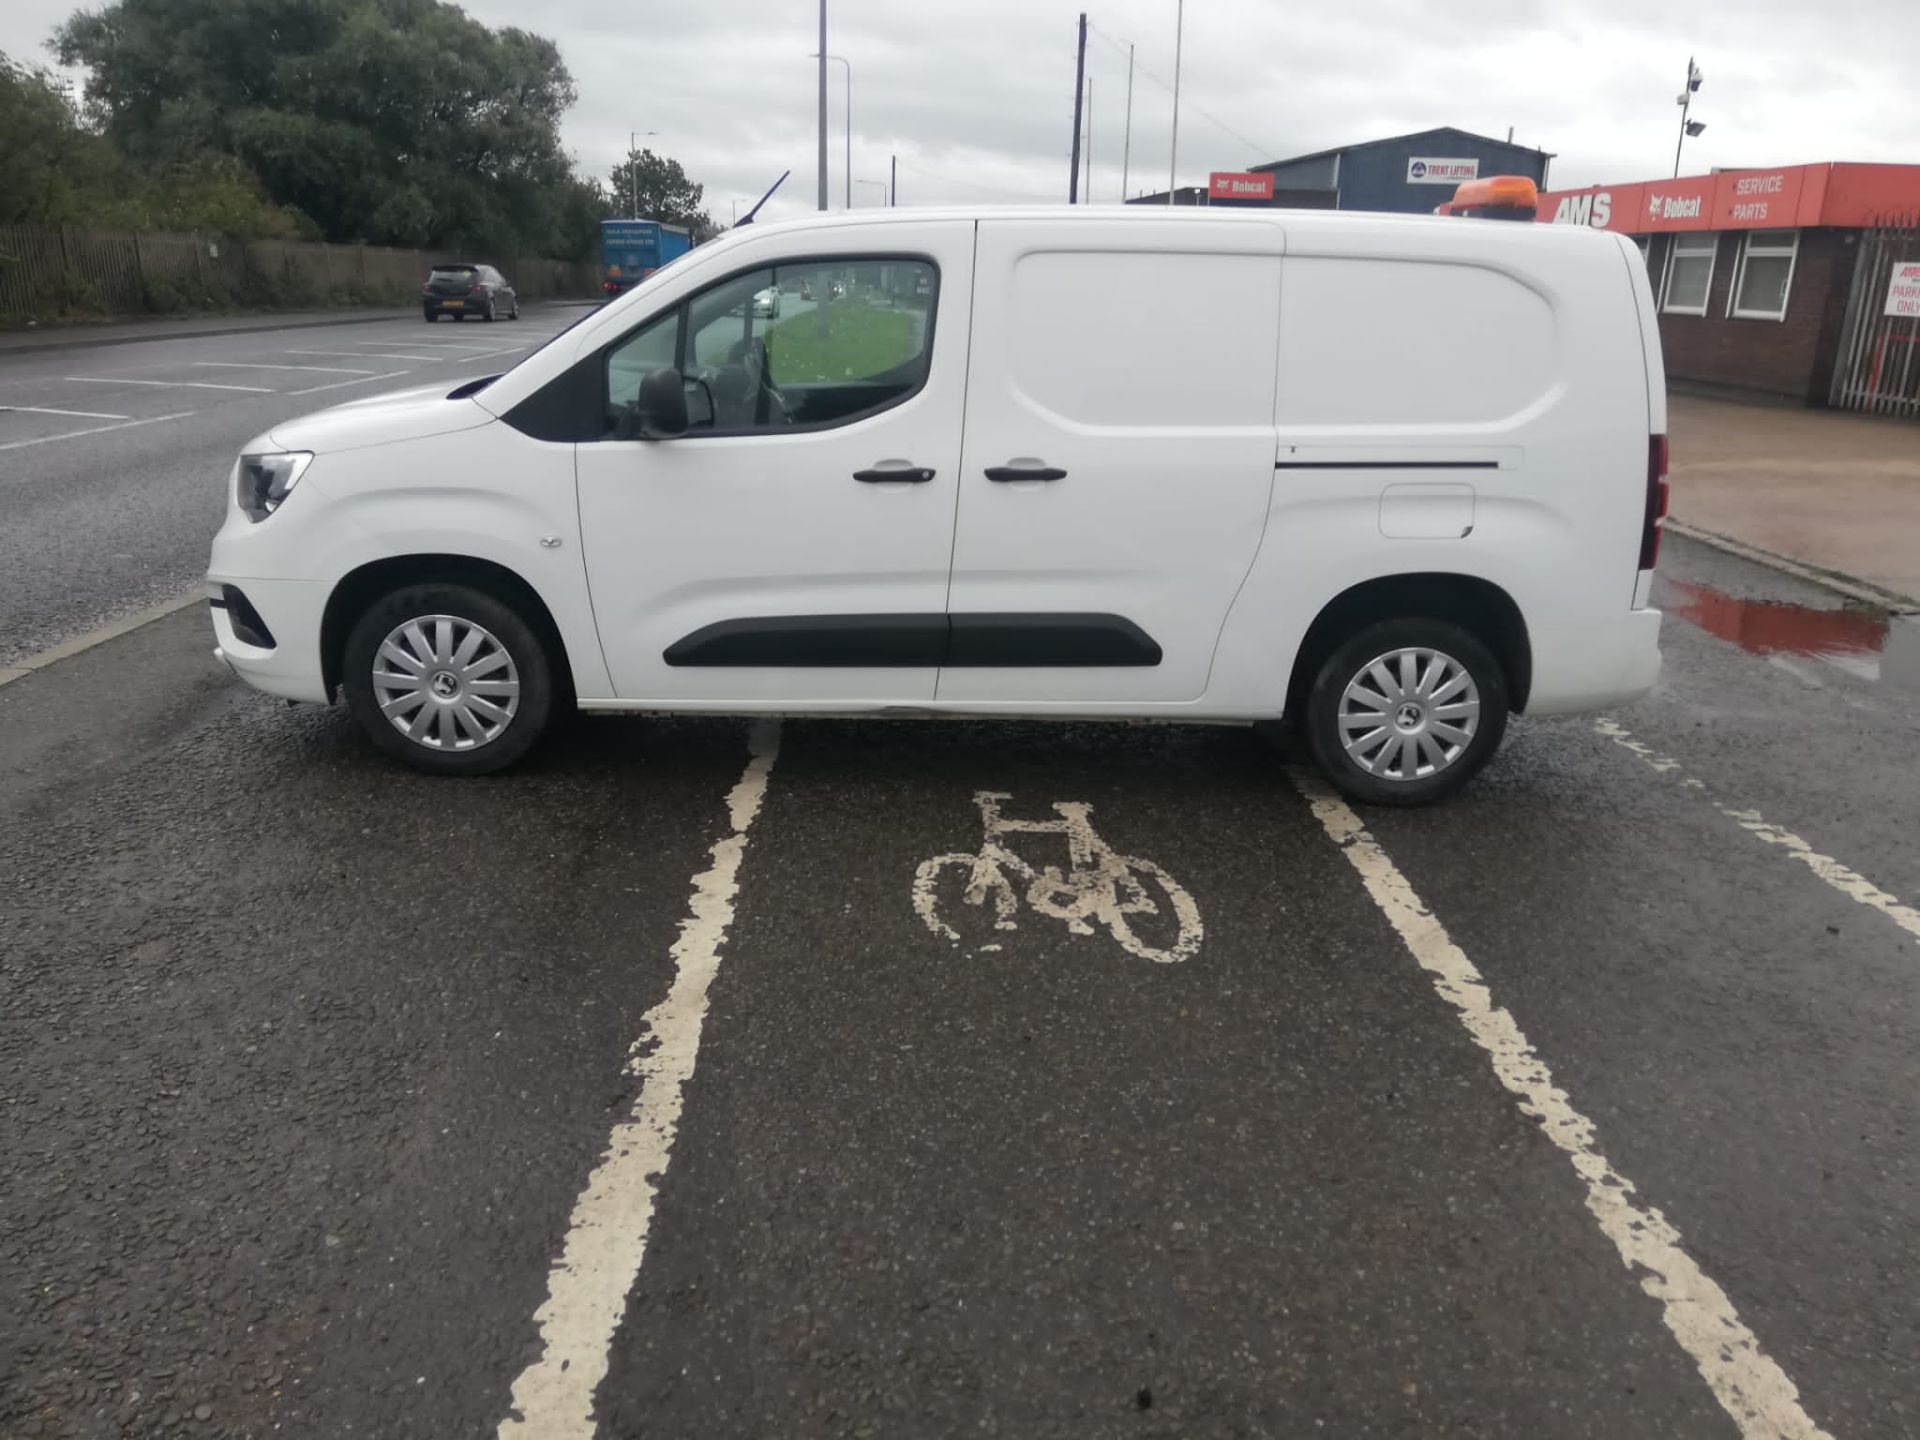 2020 70 VAUXHALL COMBO SPORTIVE LWB PANEL VAN - 48K MILES - AIR CON - PLY LINED - Image 10 of 10